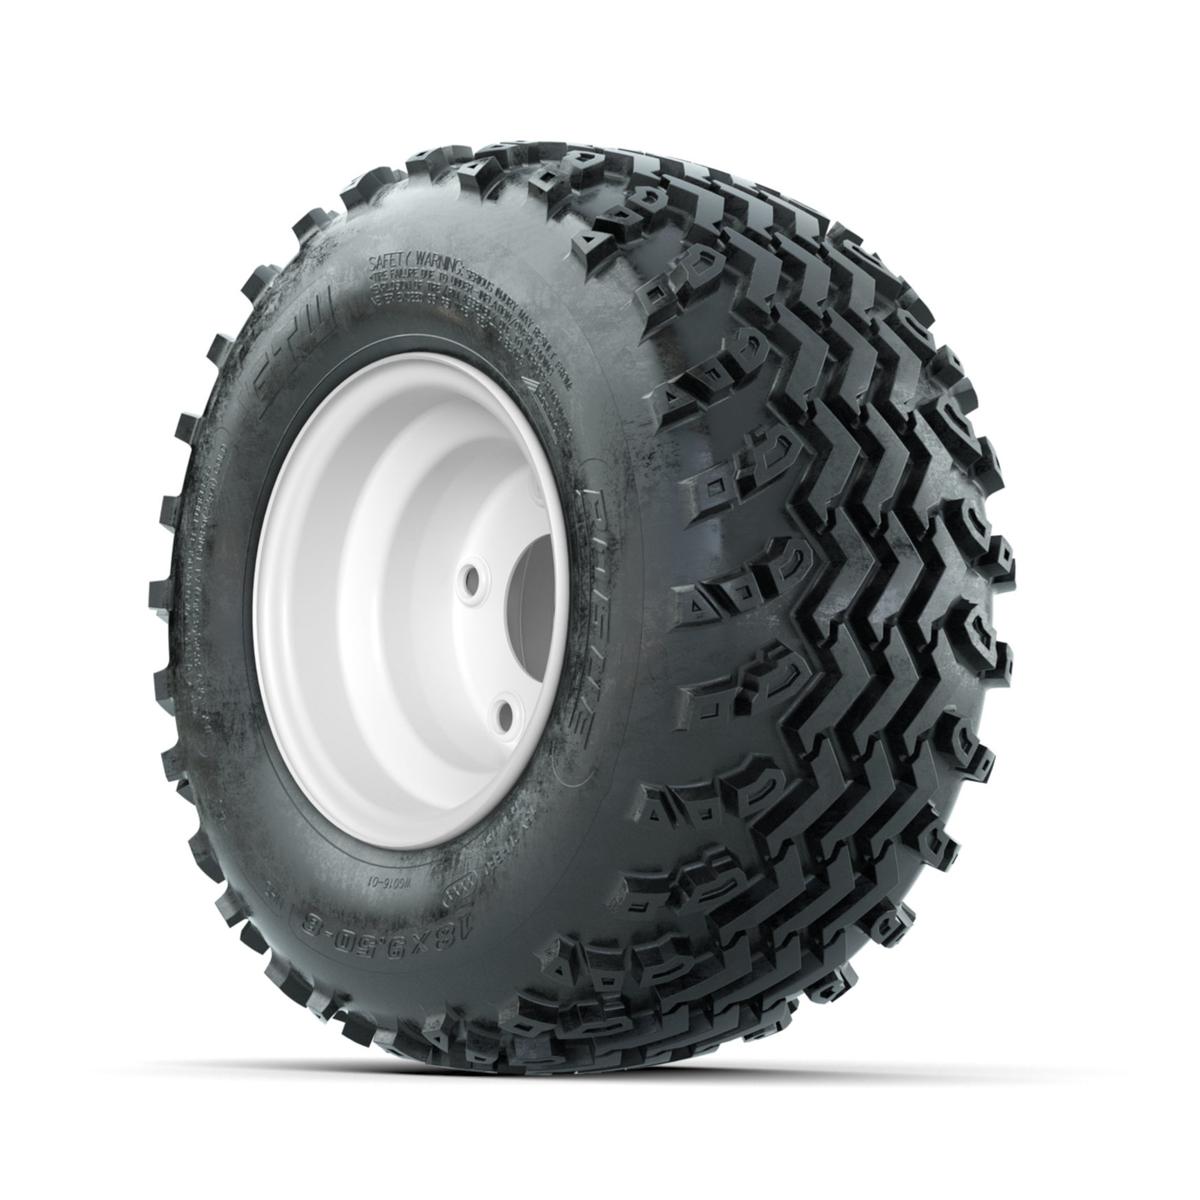 GTW Steel White Centered 5-Hole 8 in Wheels with 18x9.50-8 Rogue All Terrain Tires – Full Set